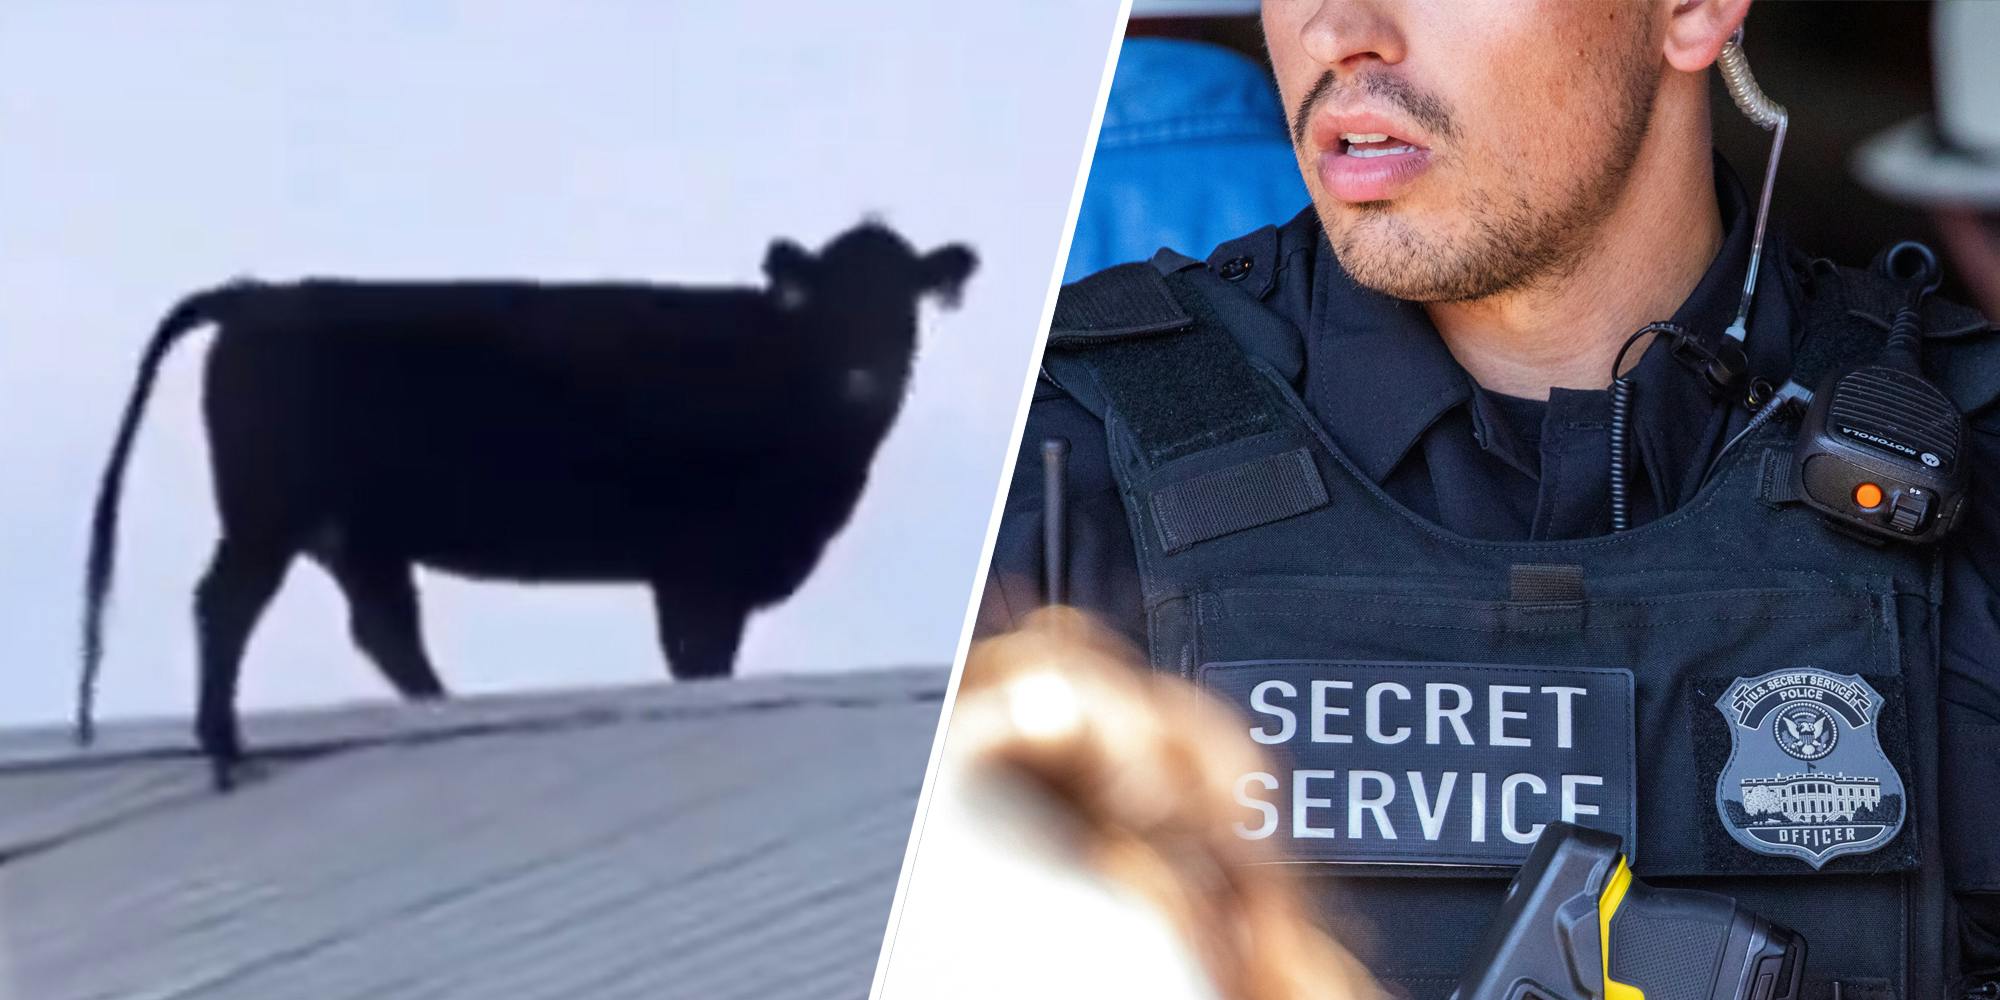 Cow on roof(l), Member of the secret service(r)